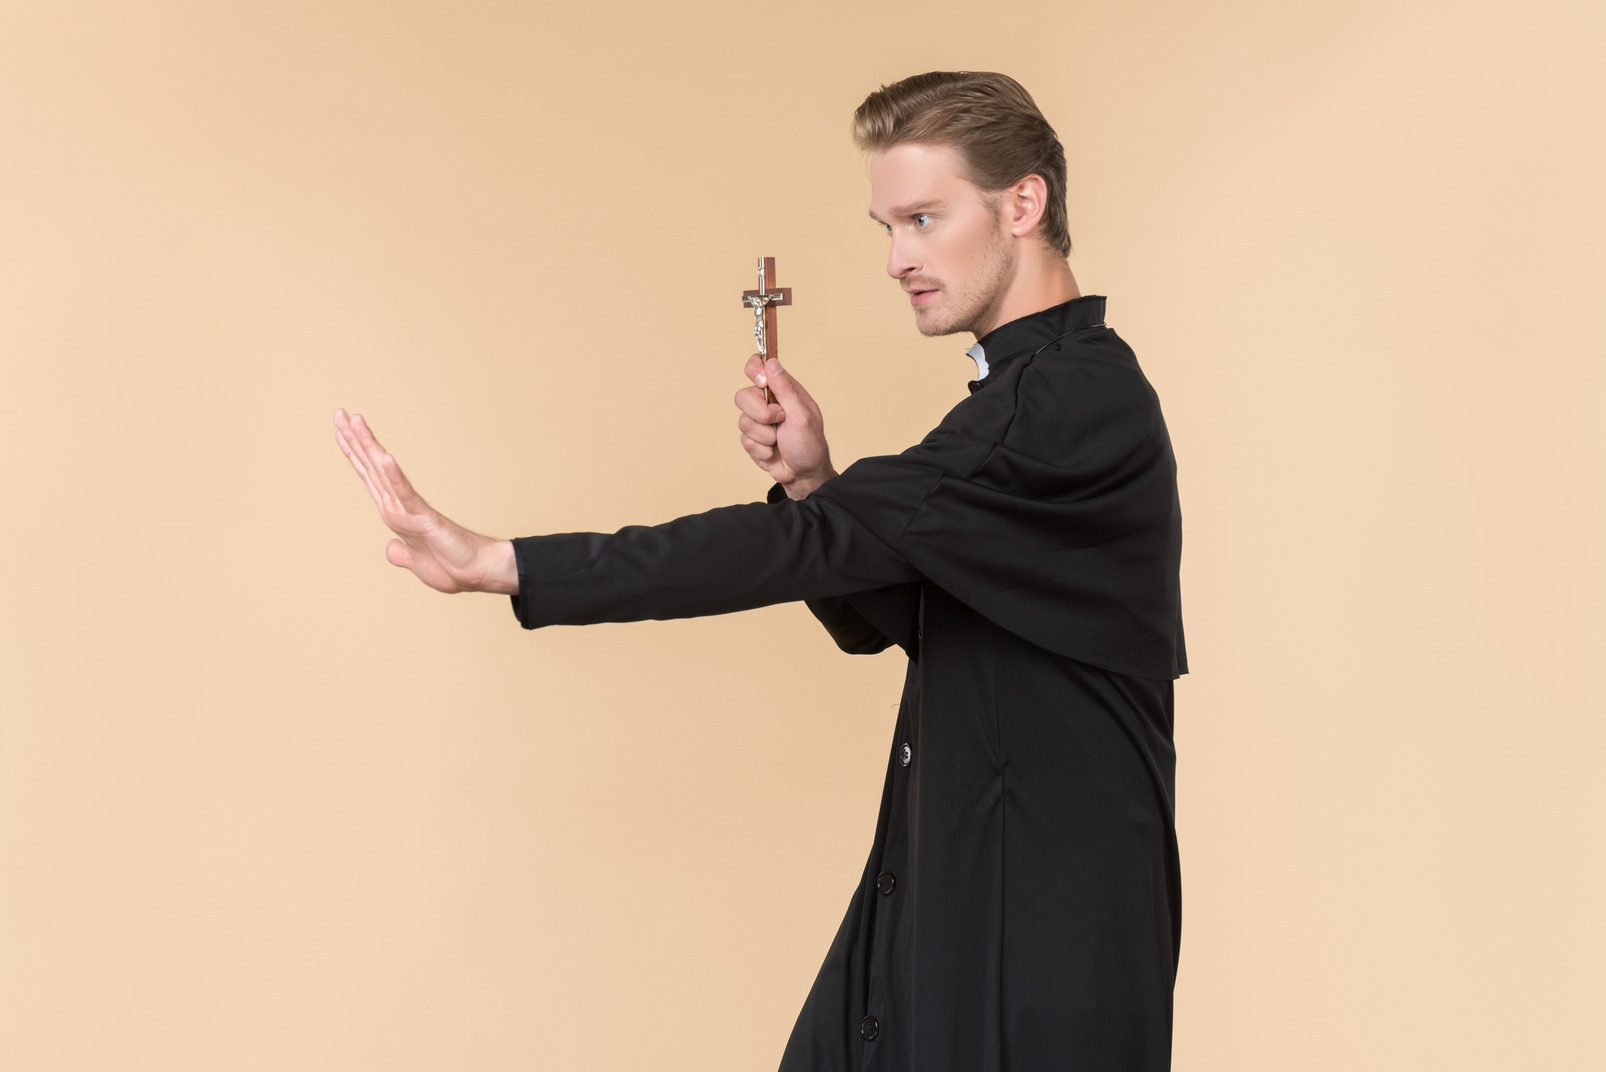 Catholic priest standing in profile and holding cross